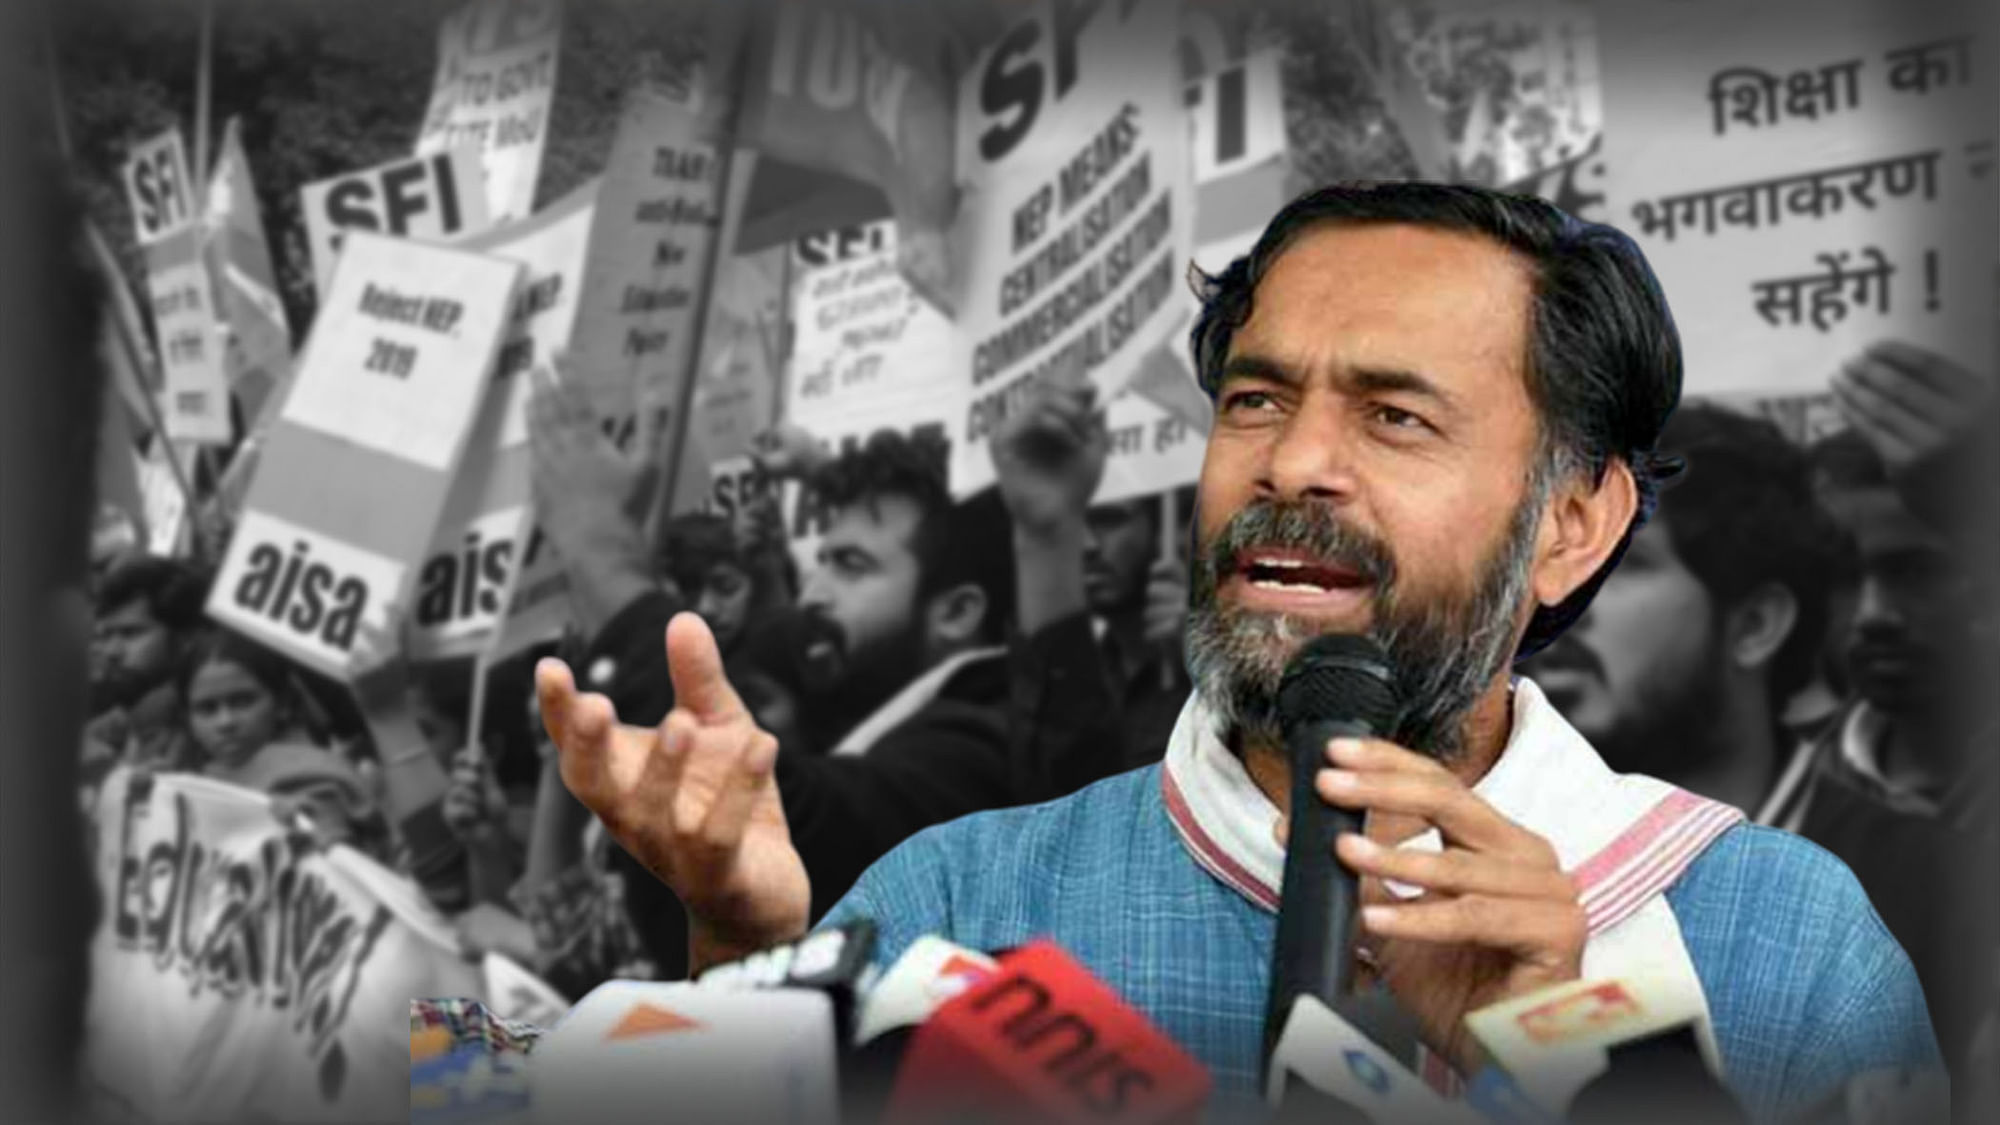 At a JNU protests, Yogendra Yadav asks ‘someone with dreams but no money have no right to education?’&nbsp;